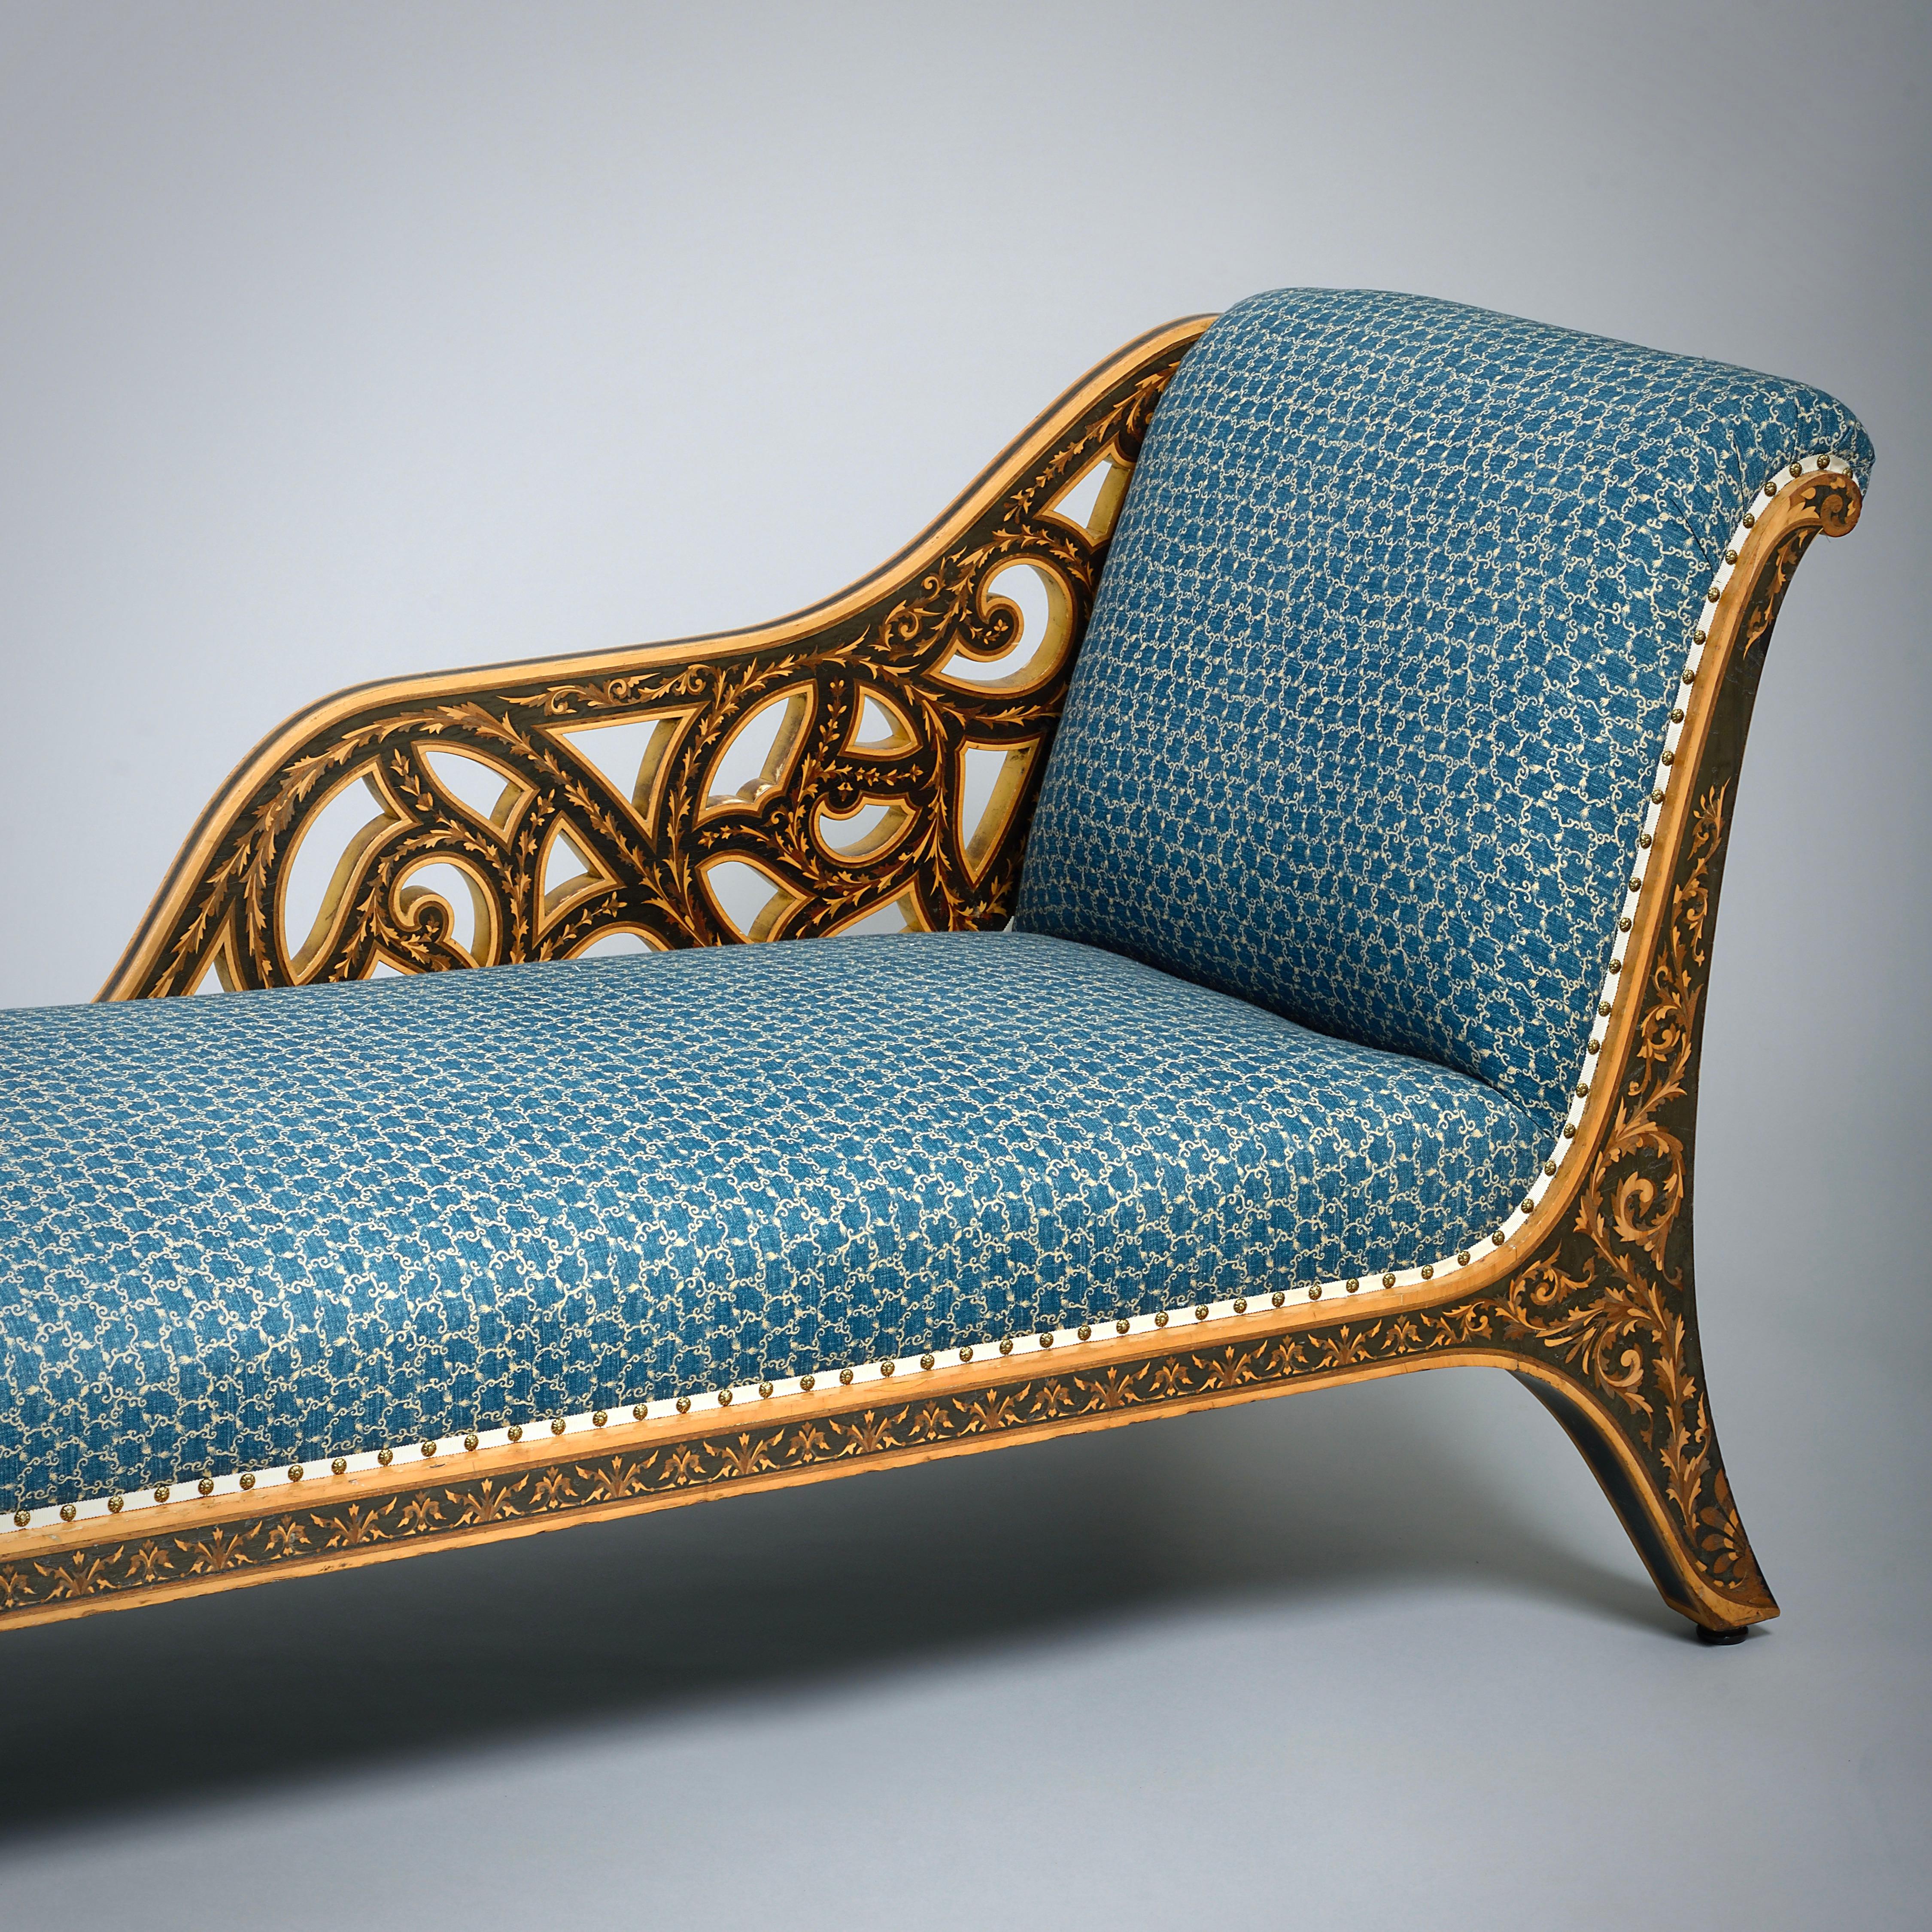 Owen Jones Chaise Longue In Good Condition For Sale In London, GB